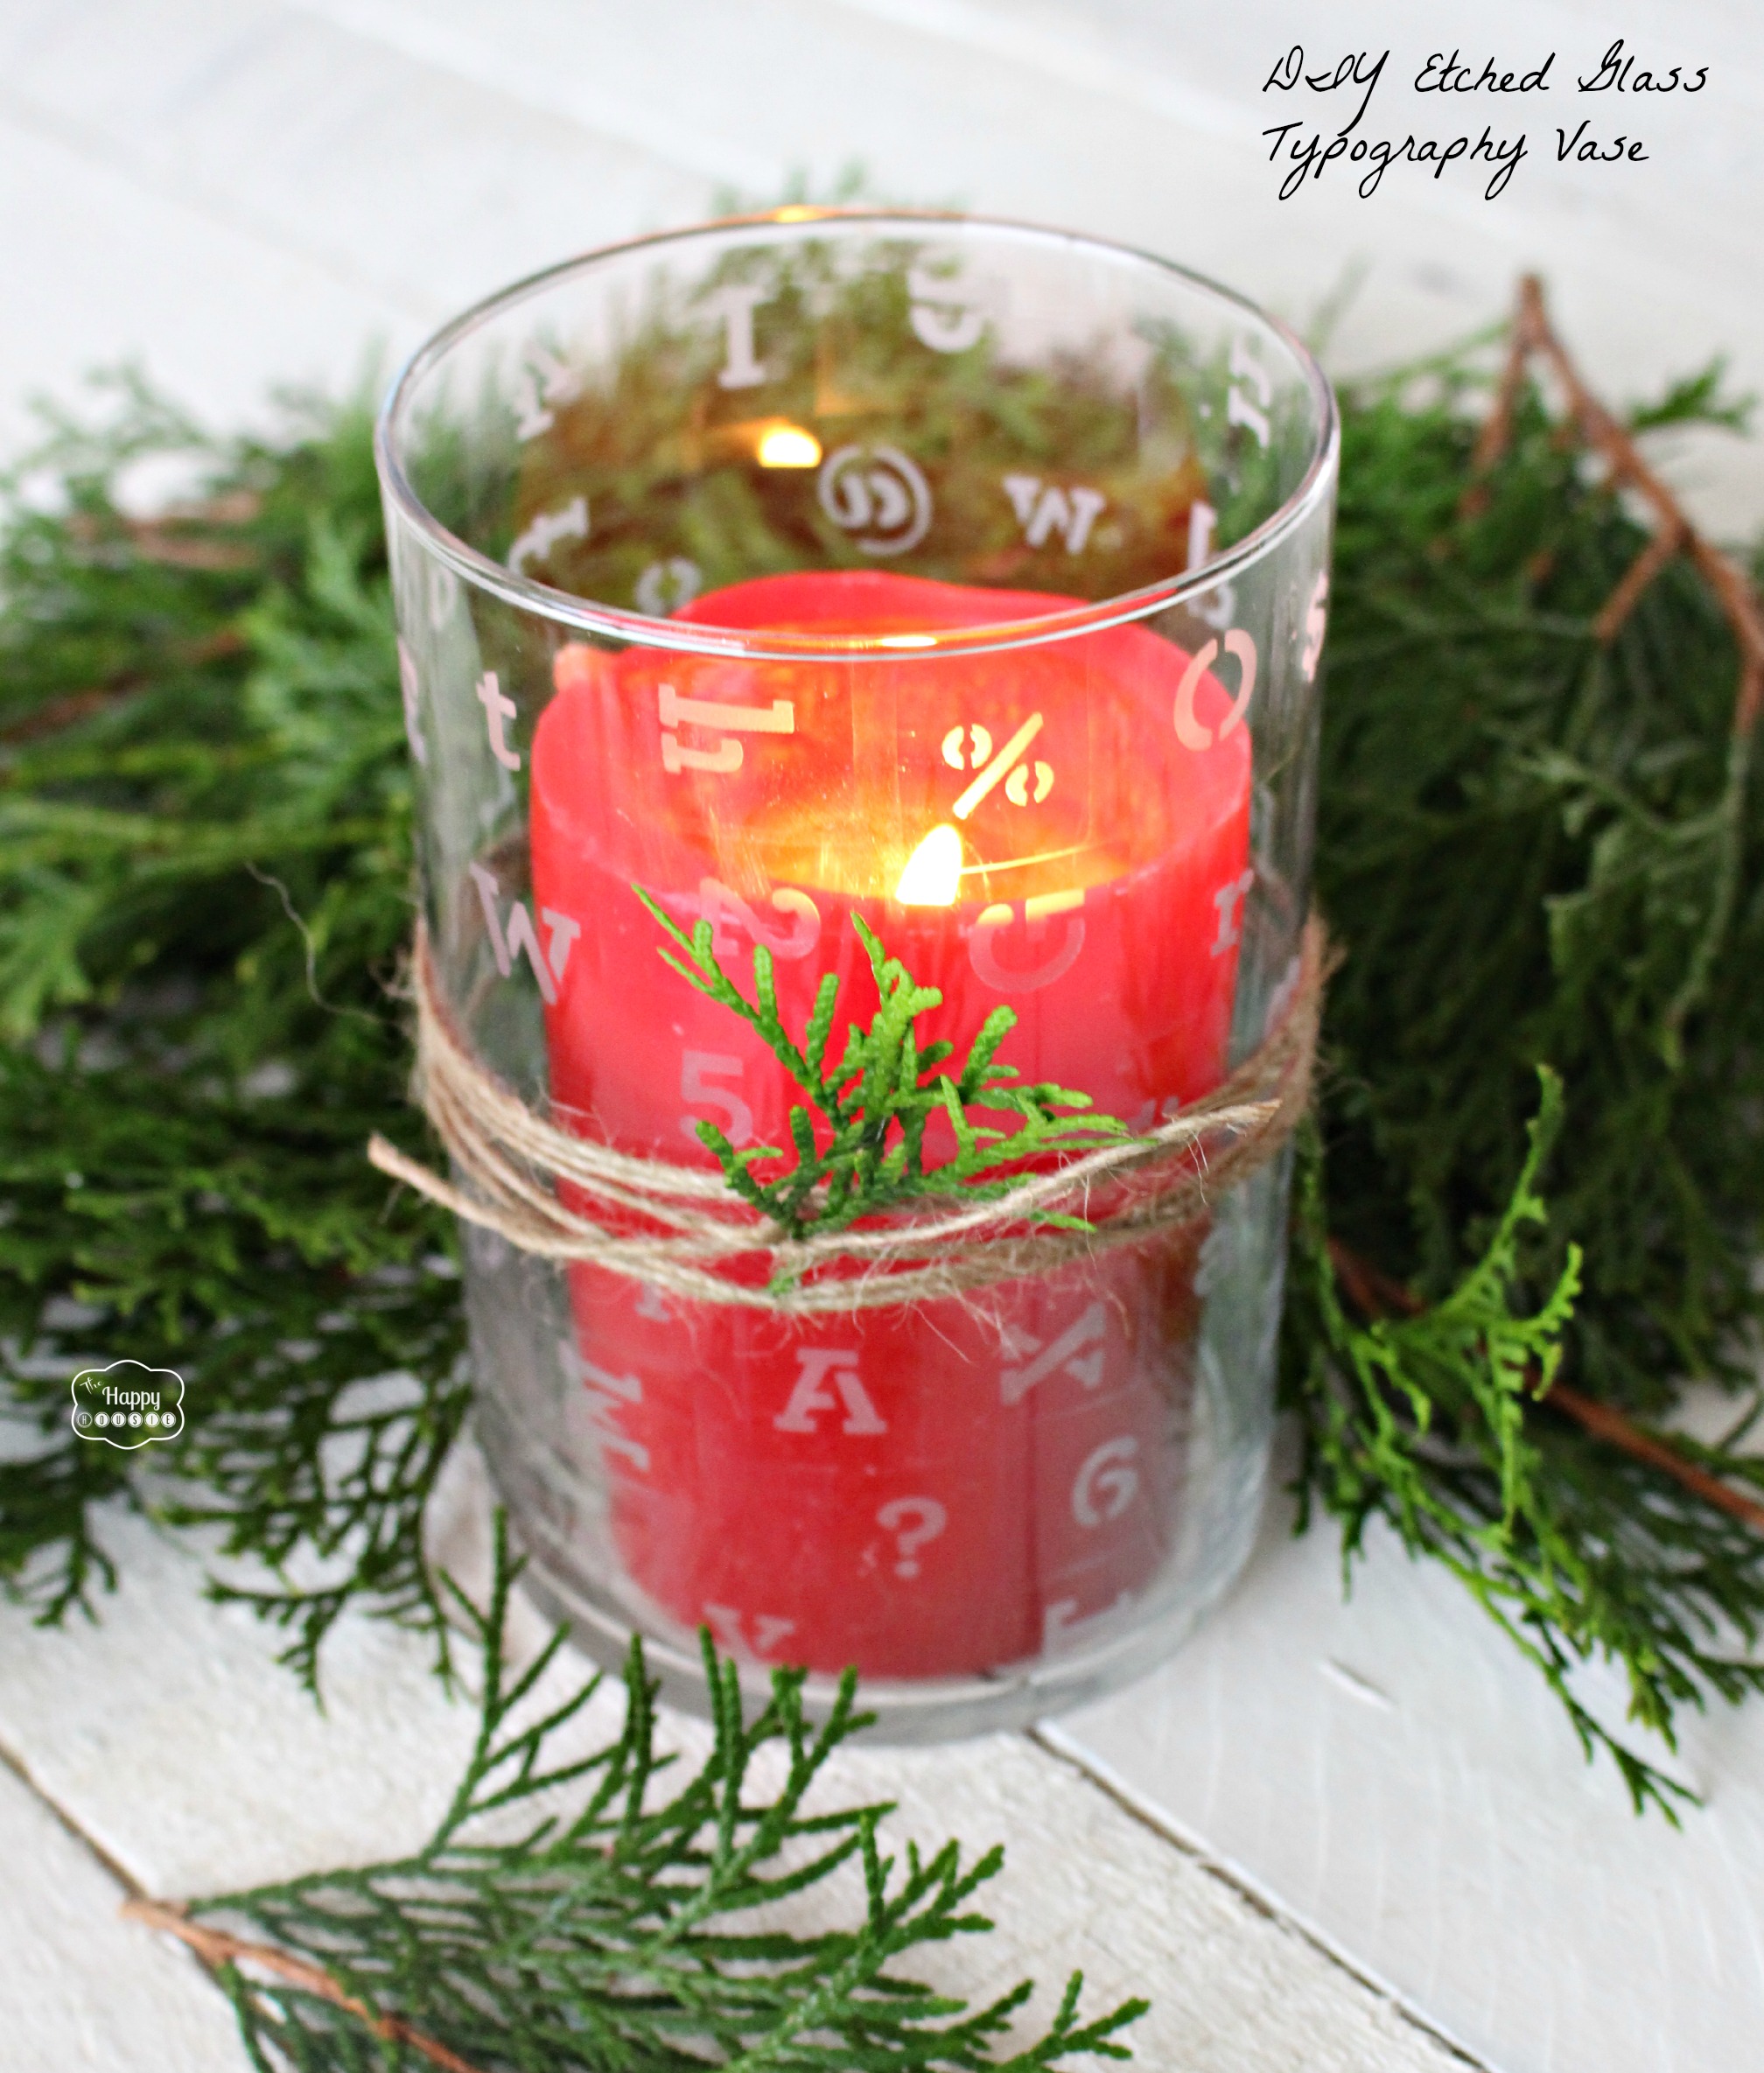 Easy DIY Etched Glass Gift Ideas